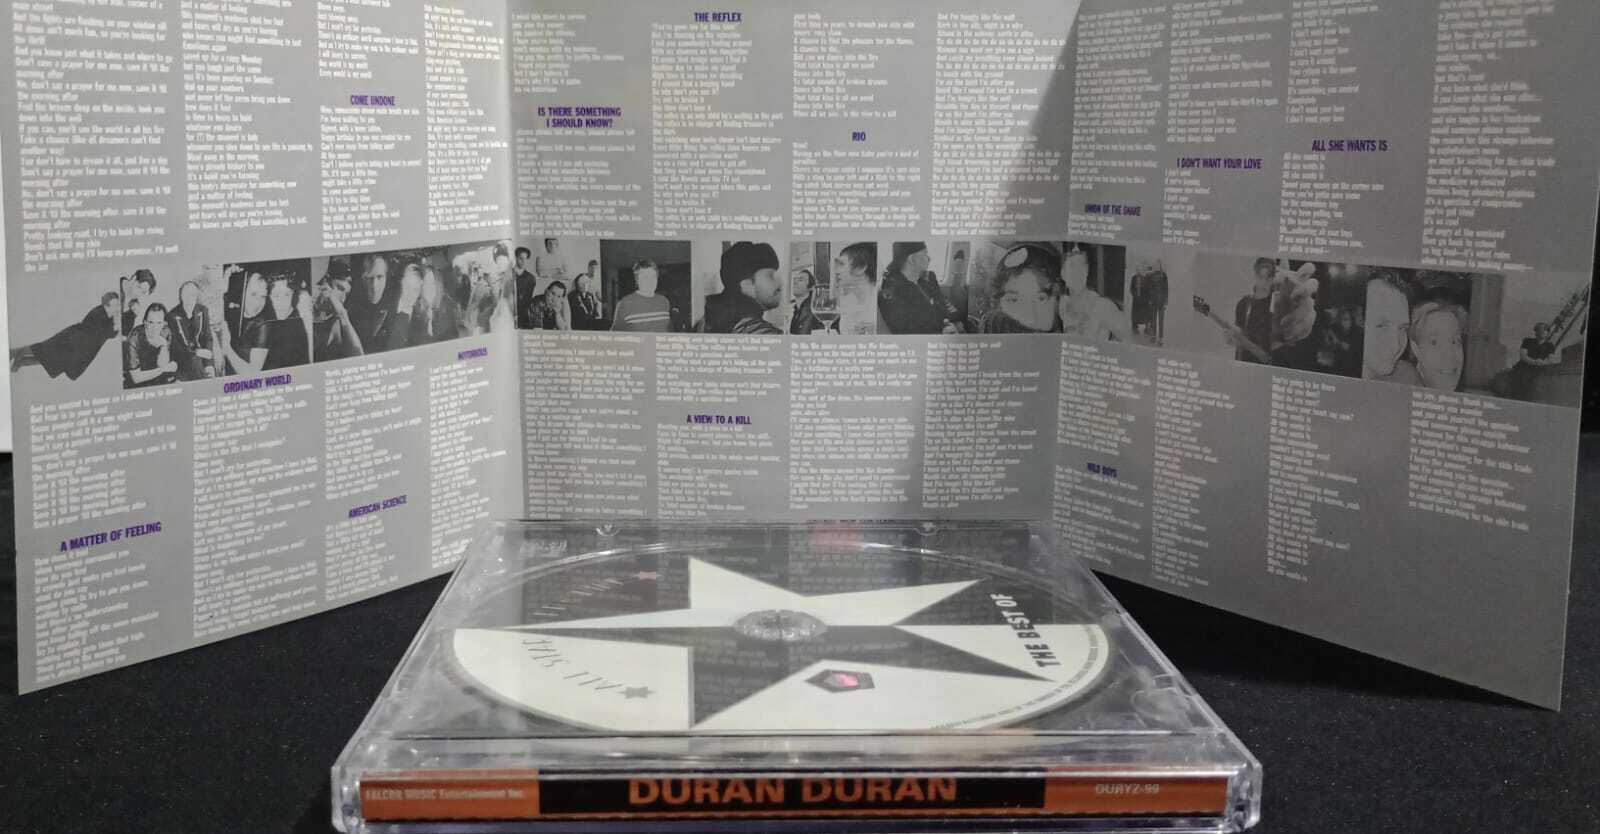 CD - Duran Duran - The Best Of - All Star Profile Series (Holland)